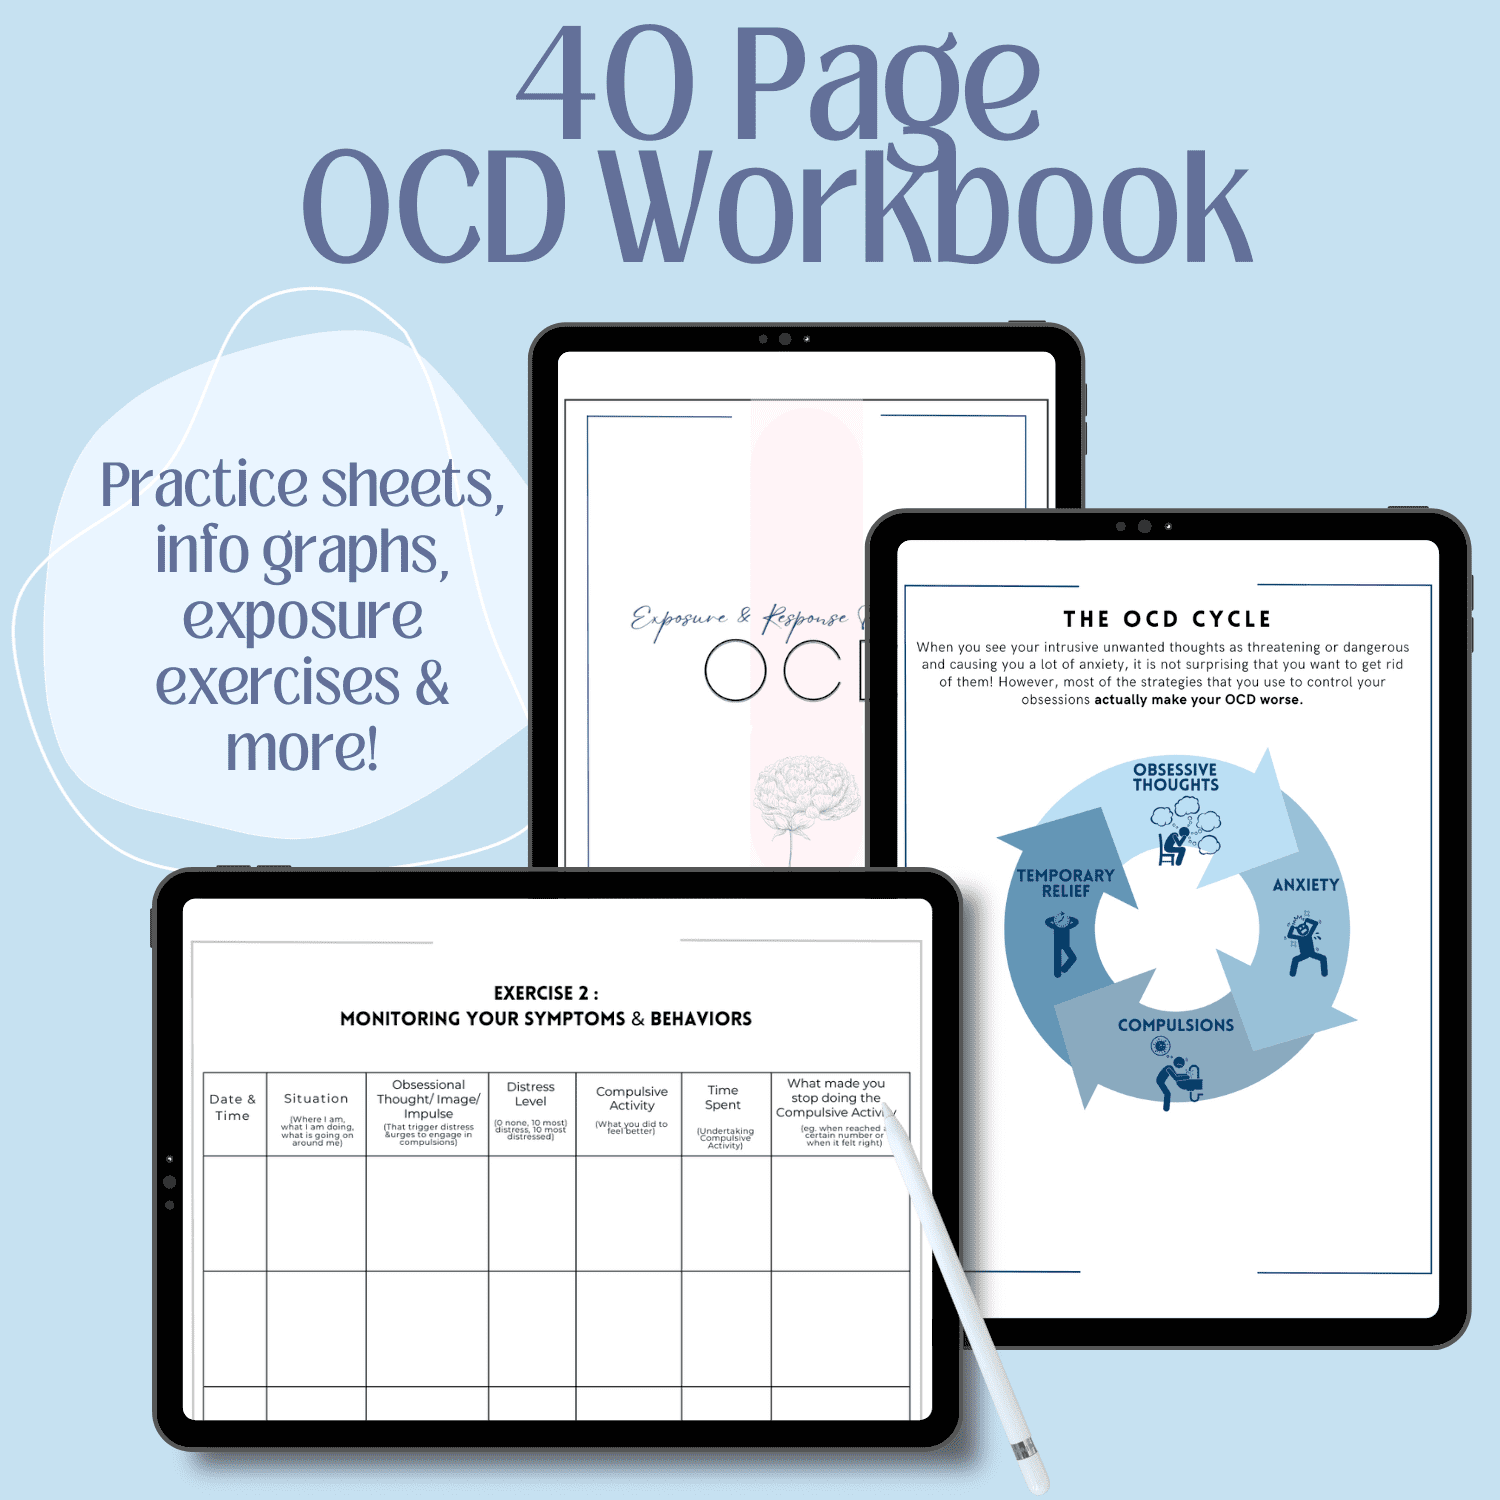 OCD workbook for landing page